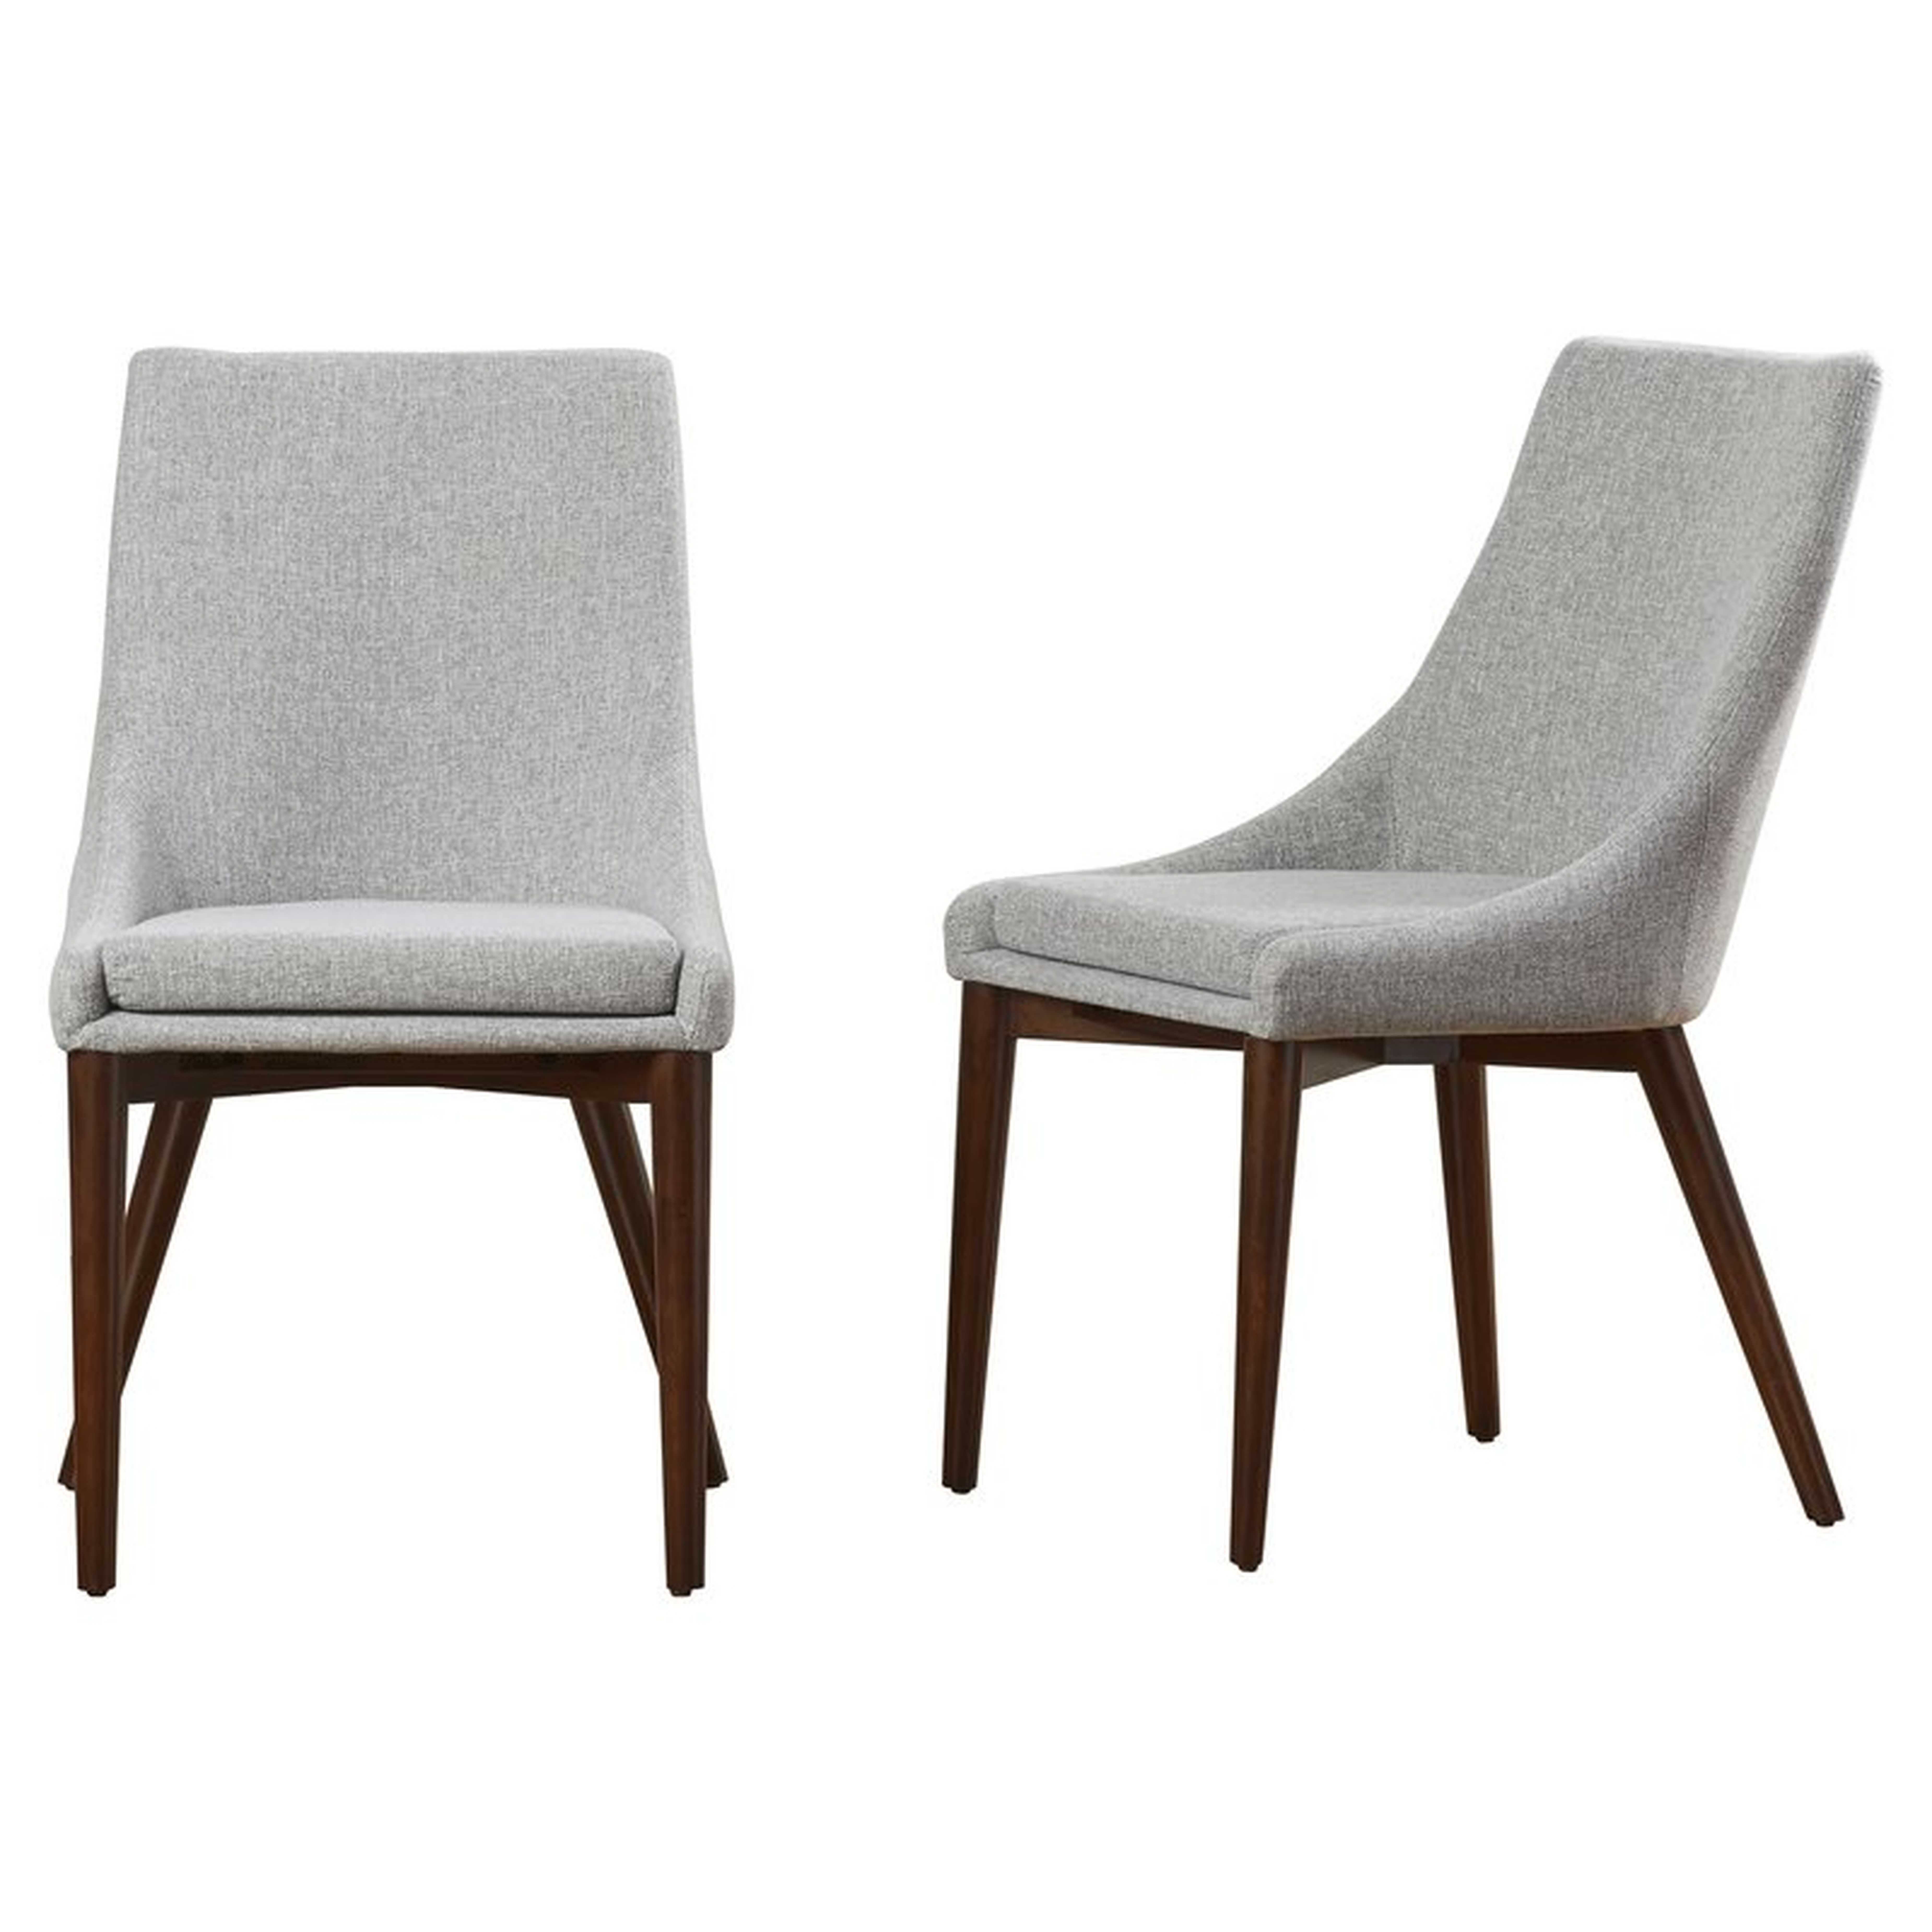 Aaliyah Upholstered Dining Chair - Set of 2 - AllModern